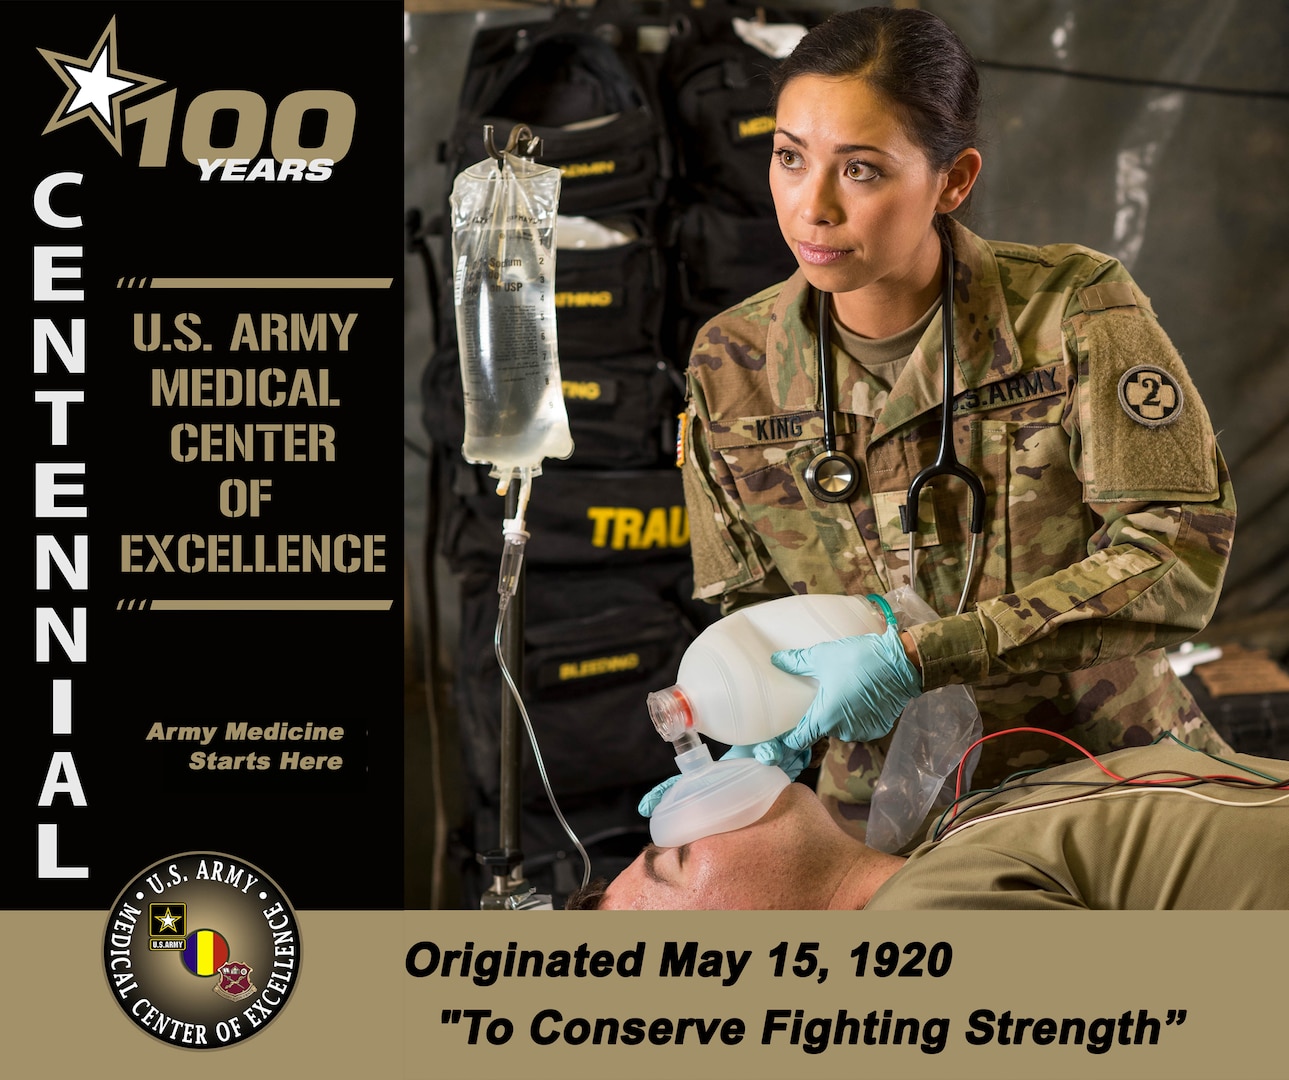 The U.S. Army Medical Center of Excellence, or MEDCoE, trains the world’s premier military medical force: Army Medicine. There are many important dates in the school’s history, but May 15, 1920, is acknowledged as the date the Army formally approved the establishment of the Medical Field Service School at Carlisle Barracks, Pennsylvania, where MEDCoE traces its origins.